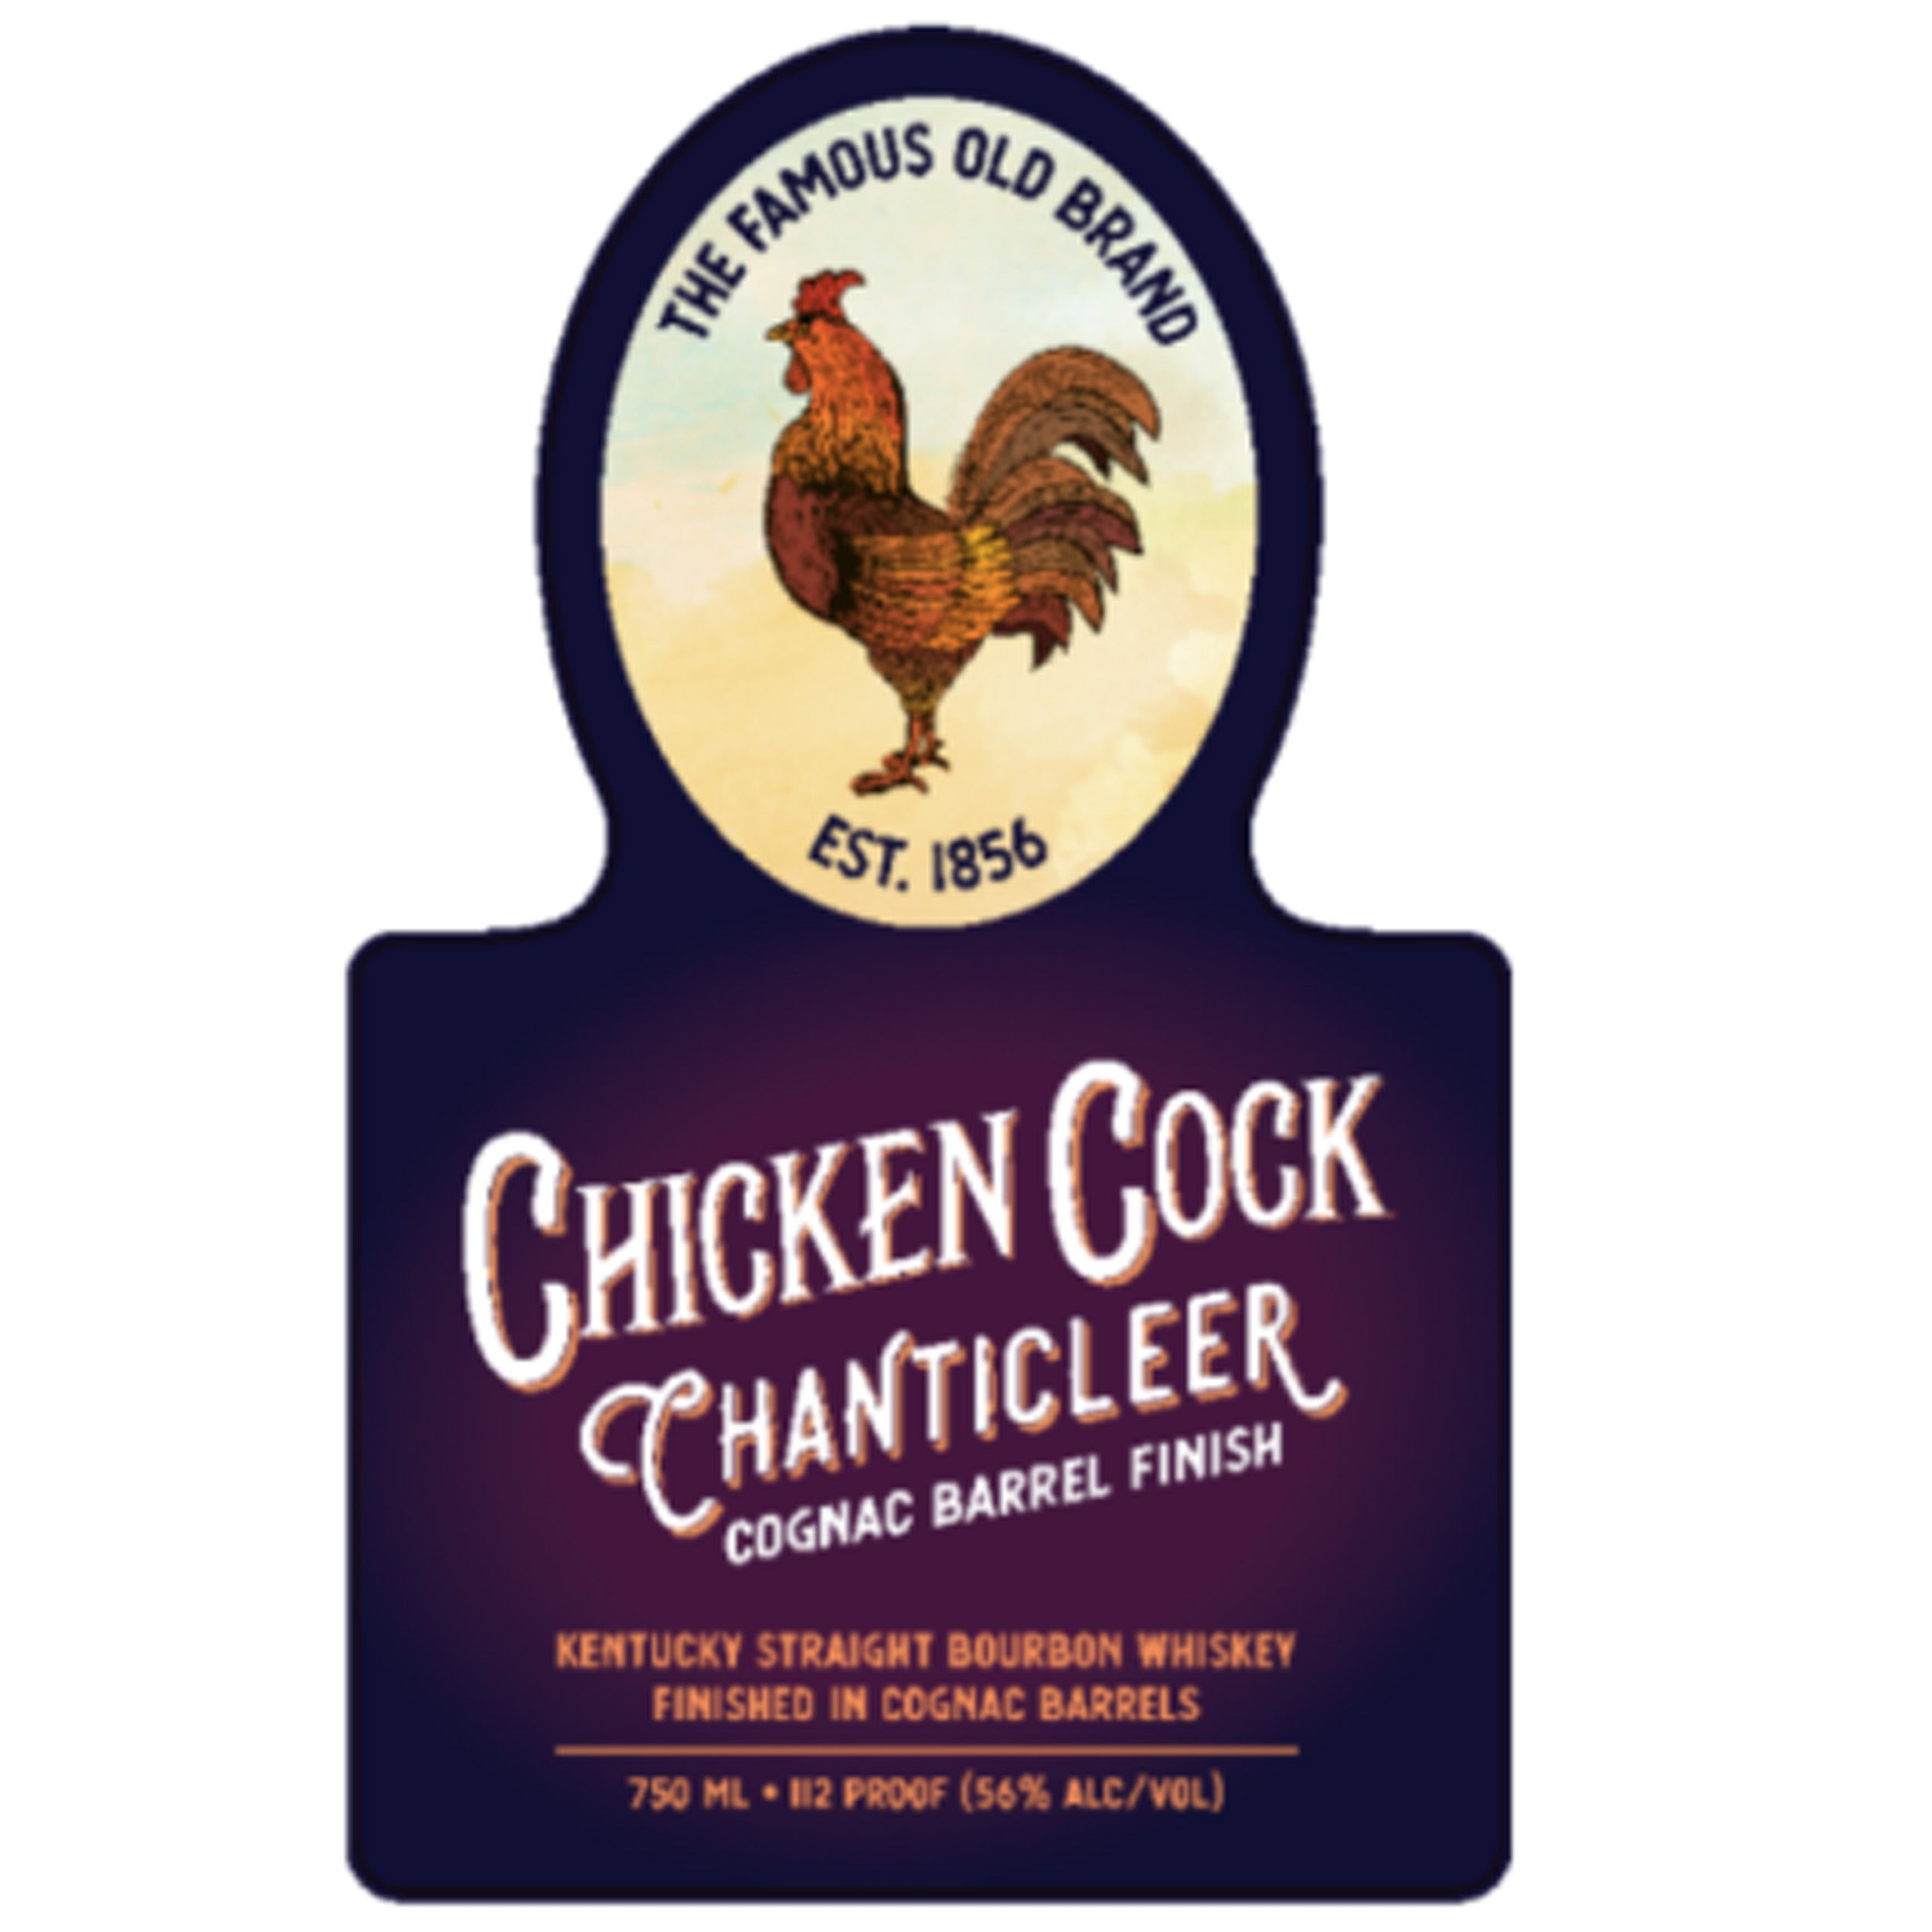 Chicken Cock Chanticleer Cognac Finished Bourbon Whiskey